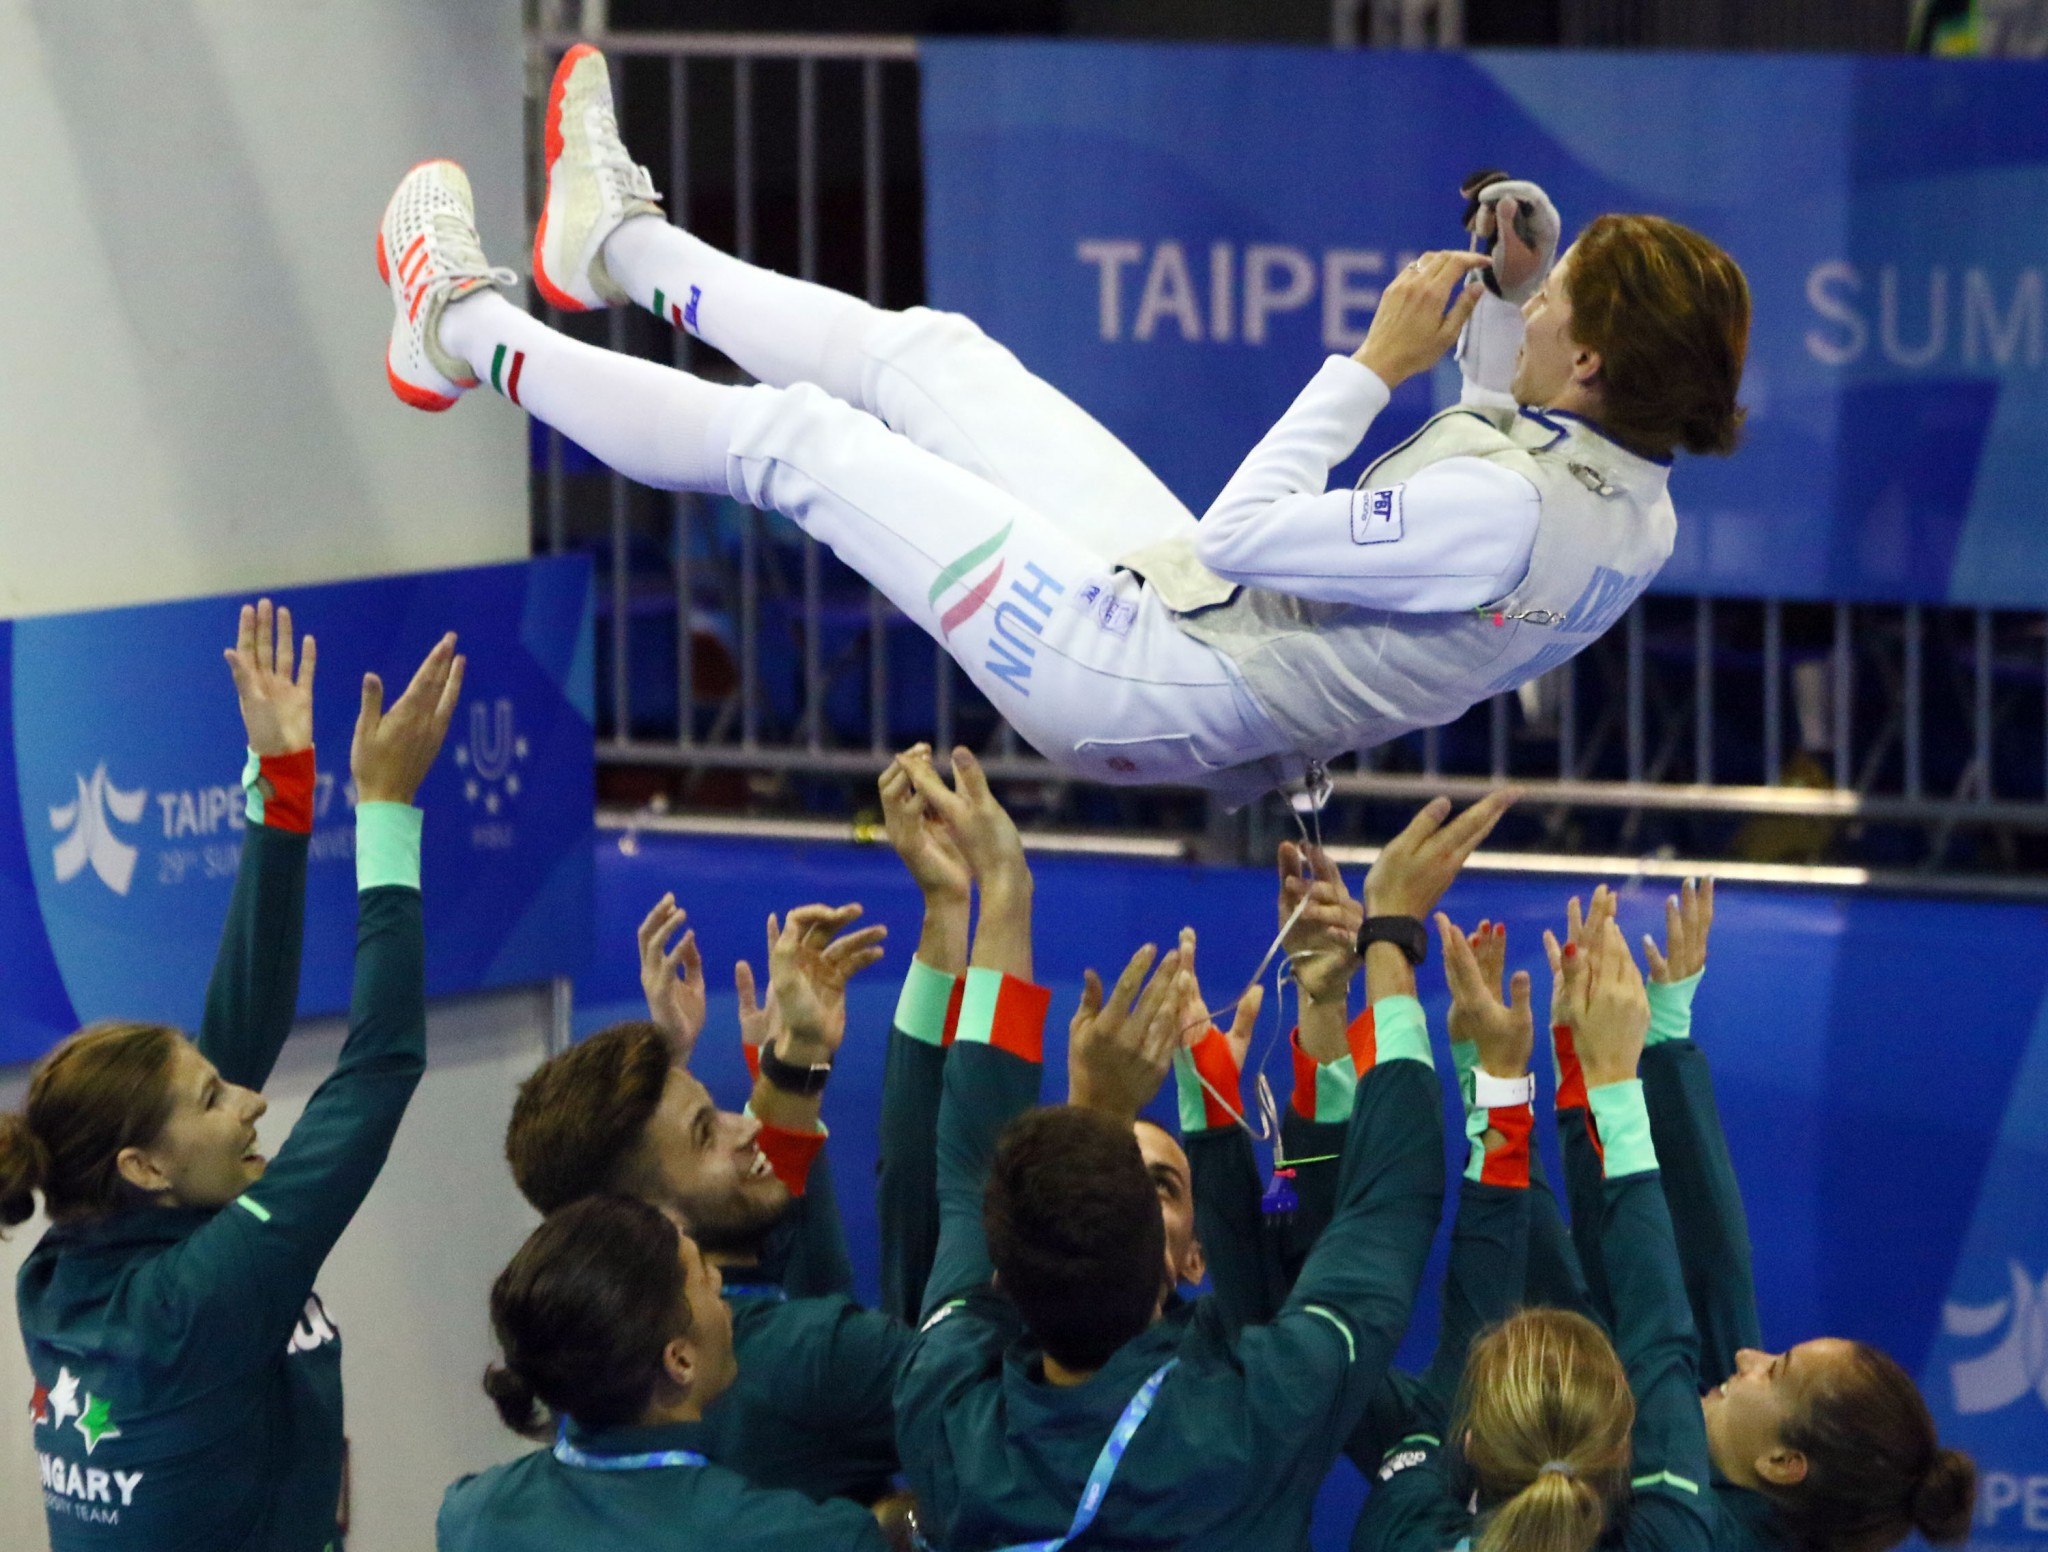 Hungary's Fanny Kreiss, pictured, dominated her opponent Yana Alborova to win women's foil gold ©Taipei 2017